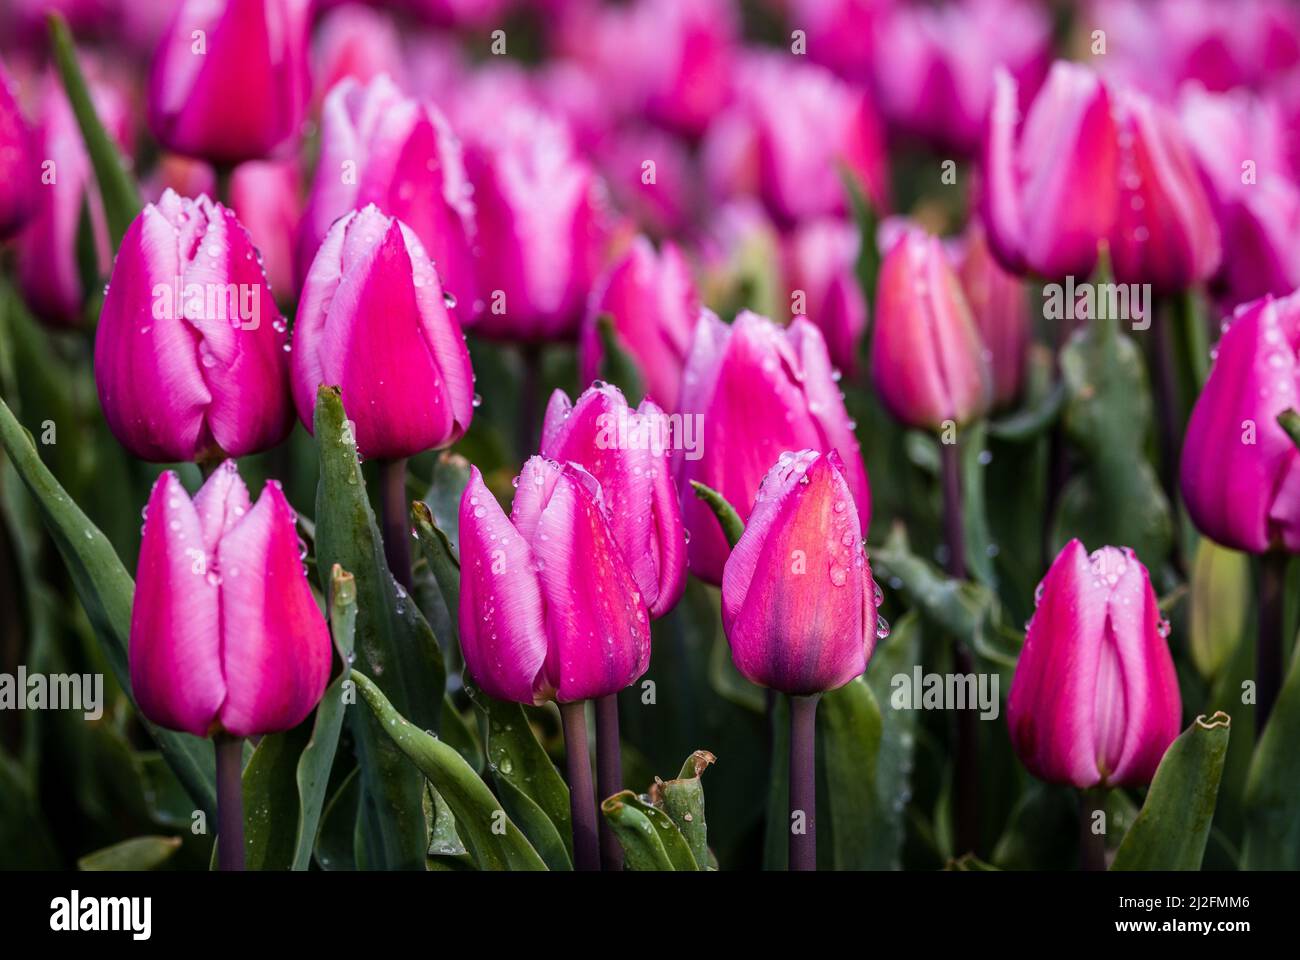 2022-03-31 08:08:13 31-03-2022, Zuid-Beijerland - Tulip fields in bloom on a field in Zuid-Beijerland. The tulips bloom early this year due to the beautiful sunny weather. Photo: ANP / Hollandse Hoogte / Jeffrey Groeneweg netherlands out - belgium out Stock Photo